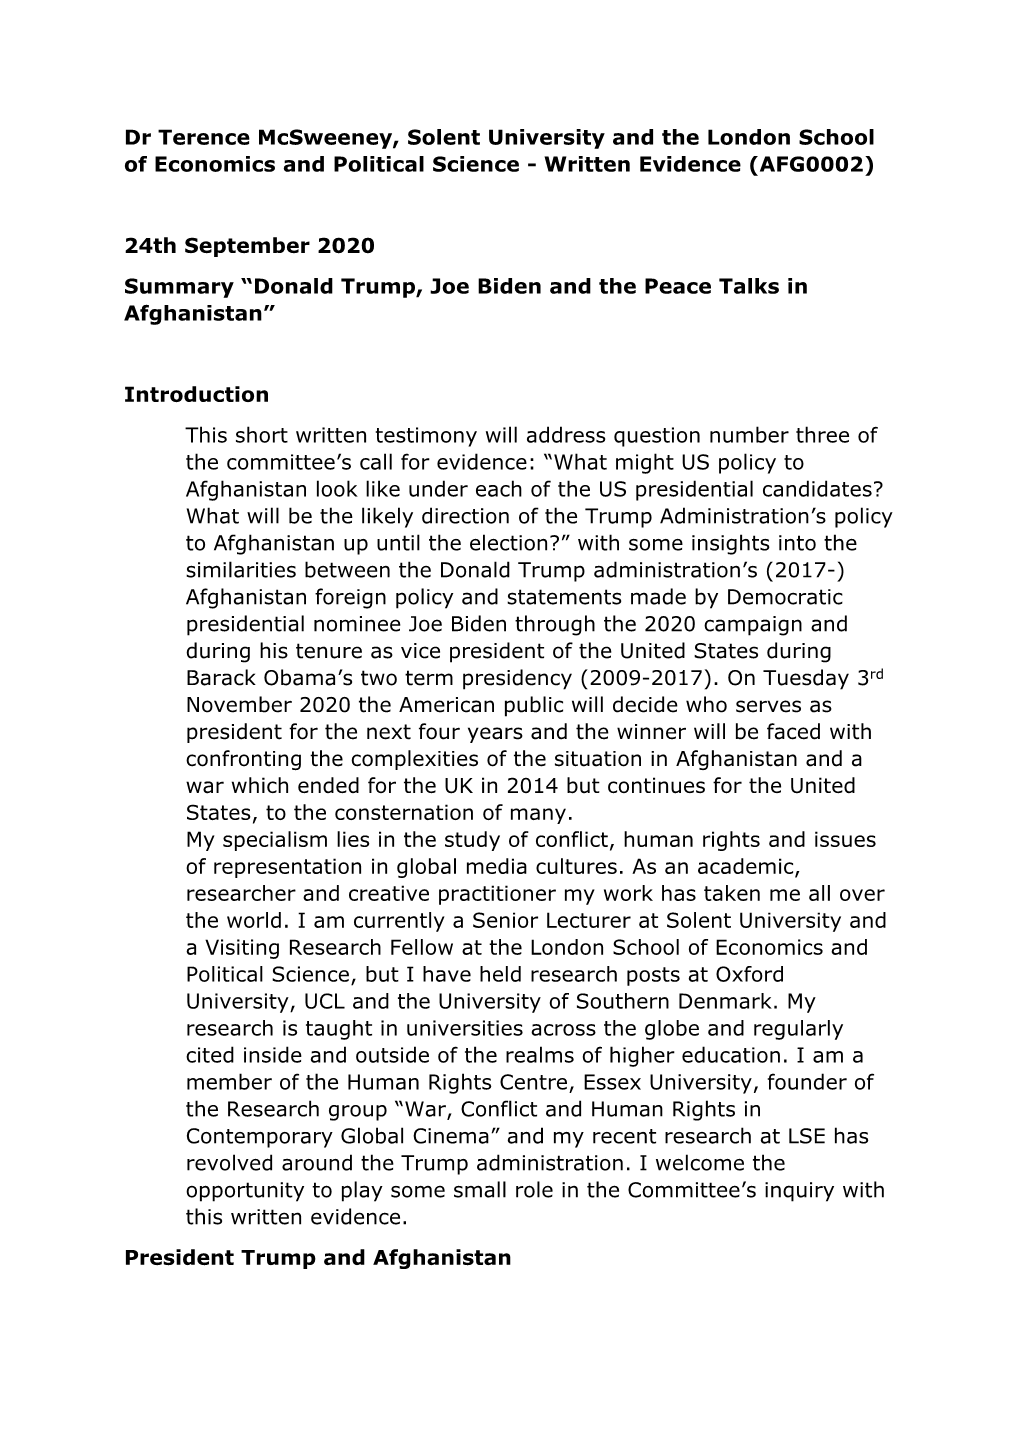 Dr Terence Mcsweeney, Solent University and the London School of Economics and Political Science - Written Evidence (AFG0002)